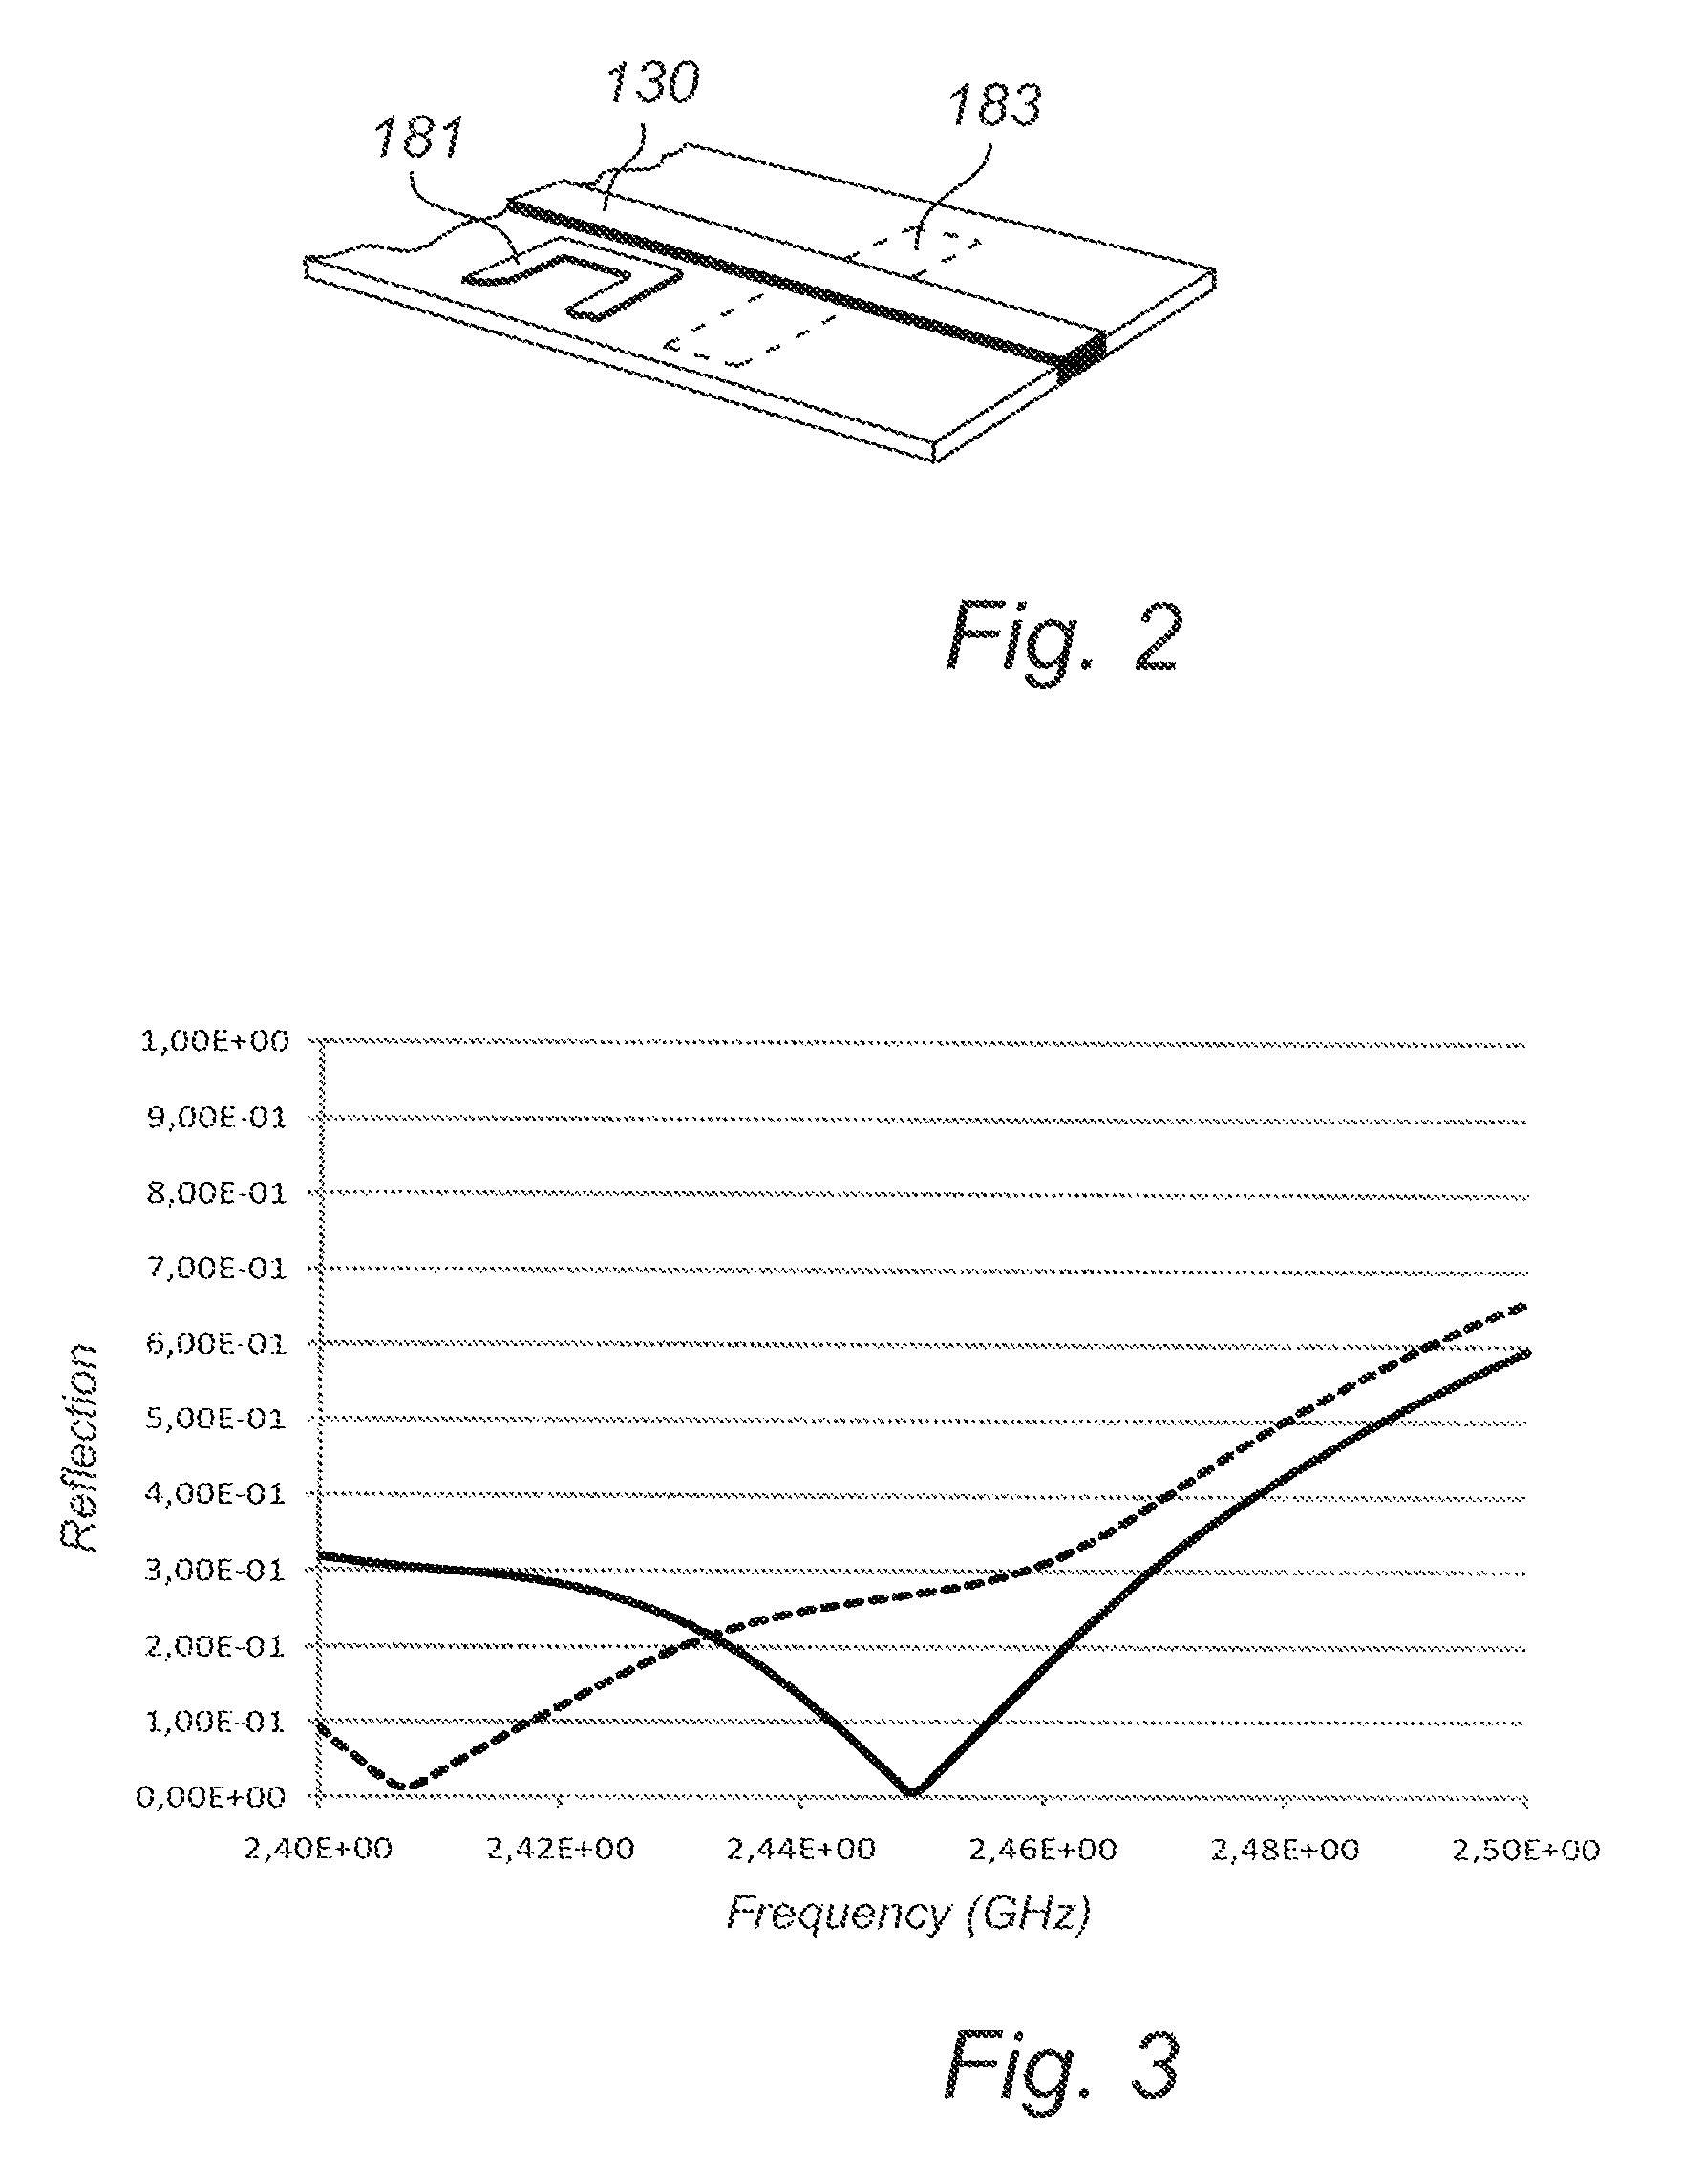 Microwave oven with a regulation system using field sensors